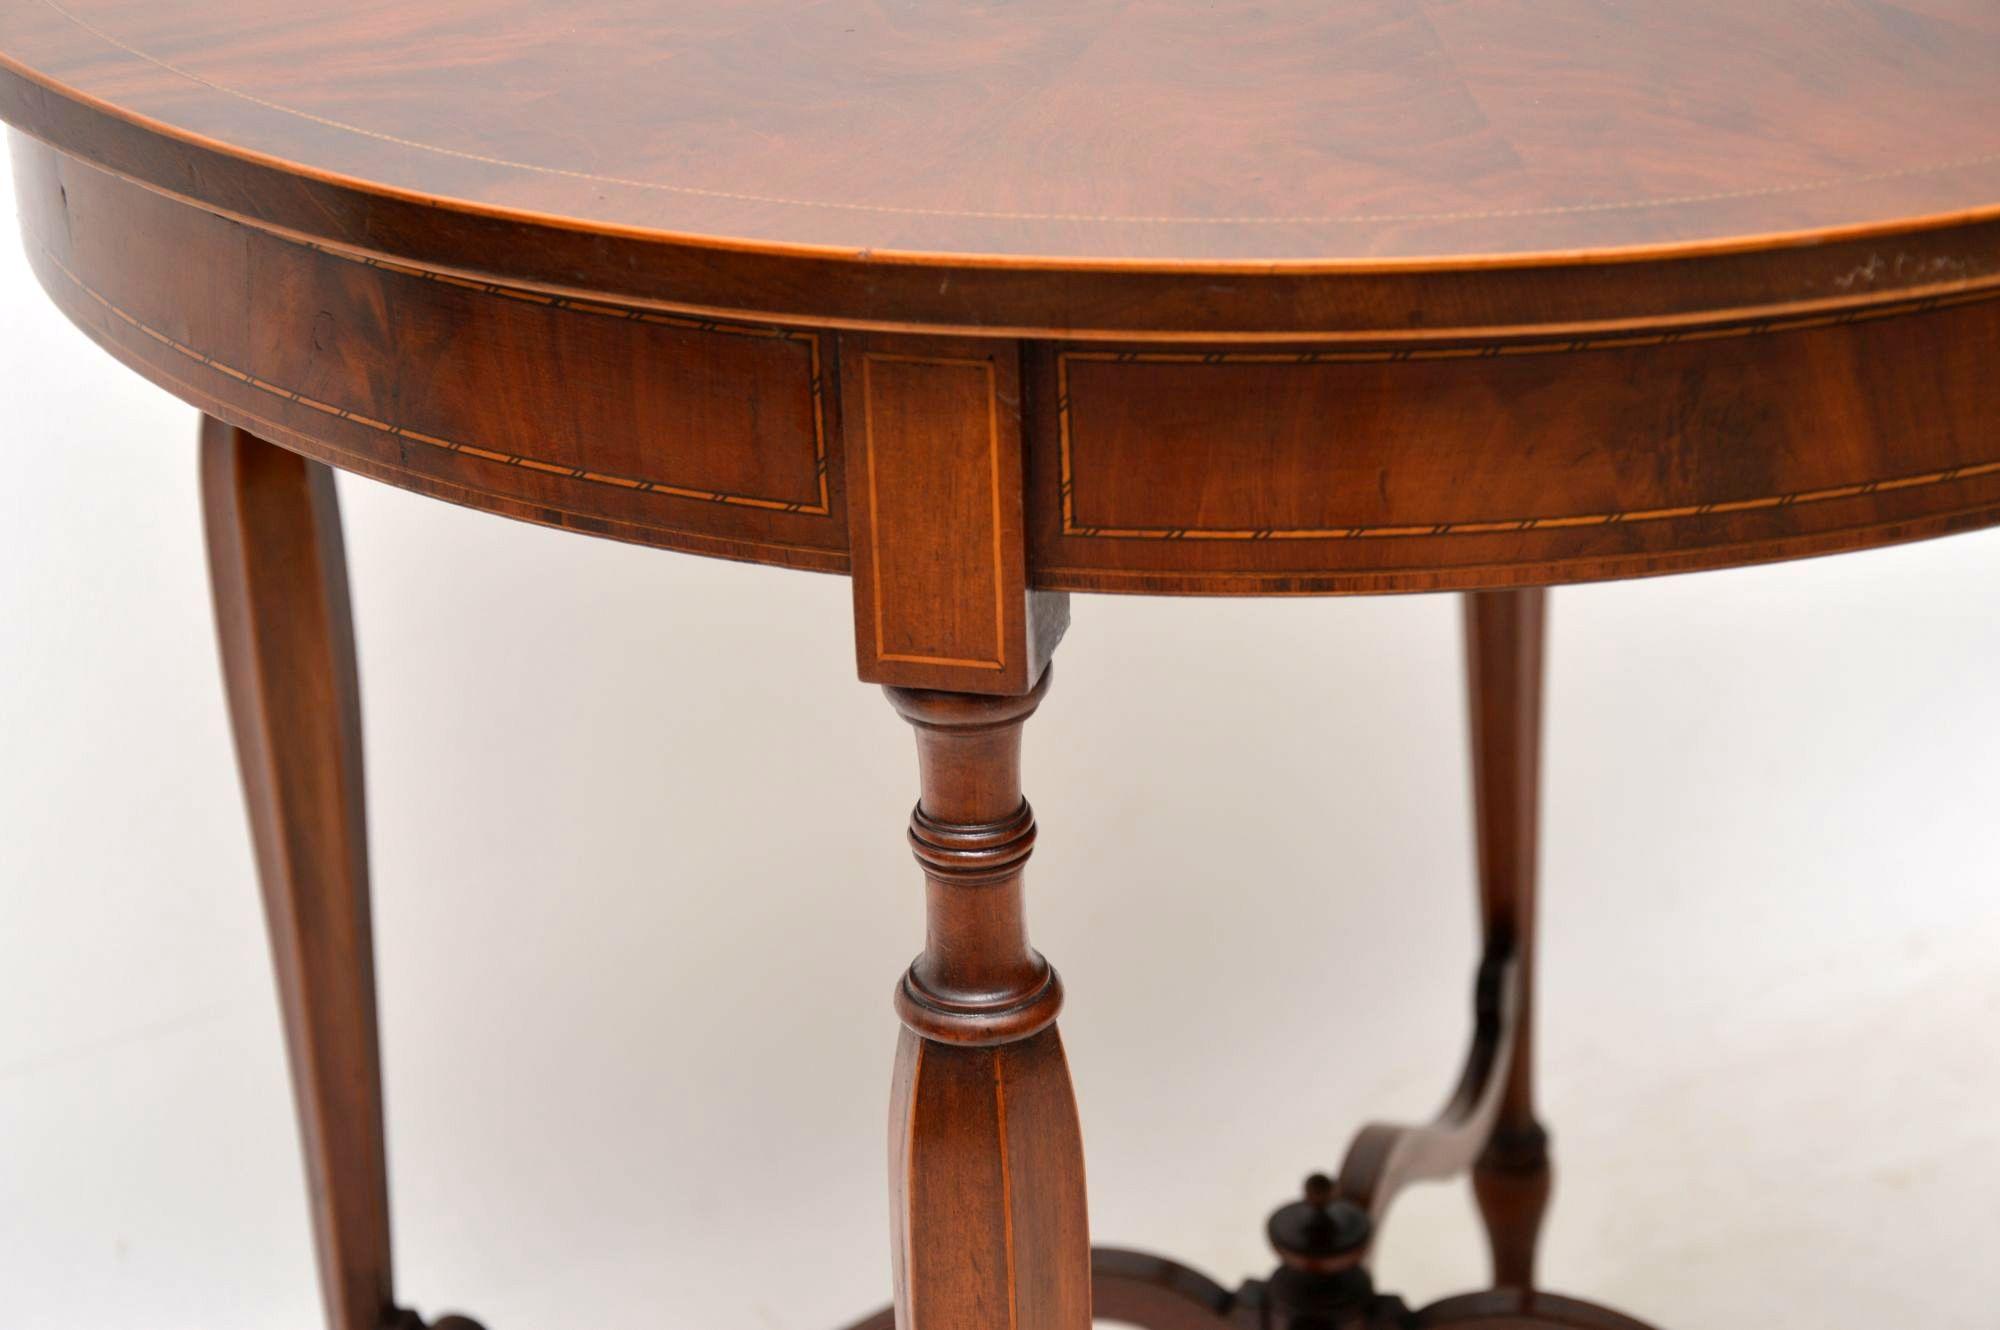 Antique Edwardian Inlaid Mahogany Occasional Table 1